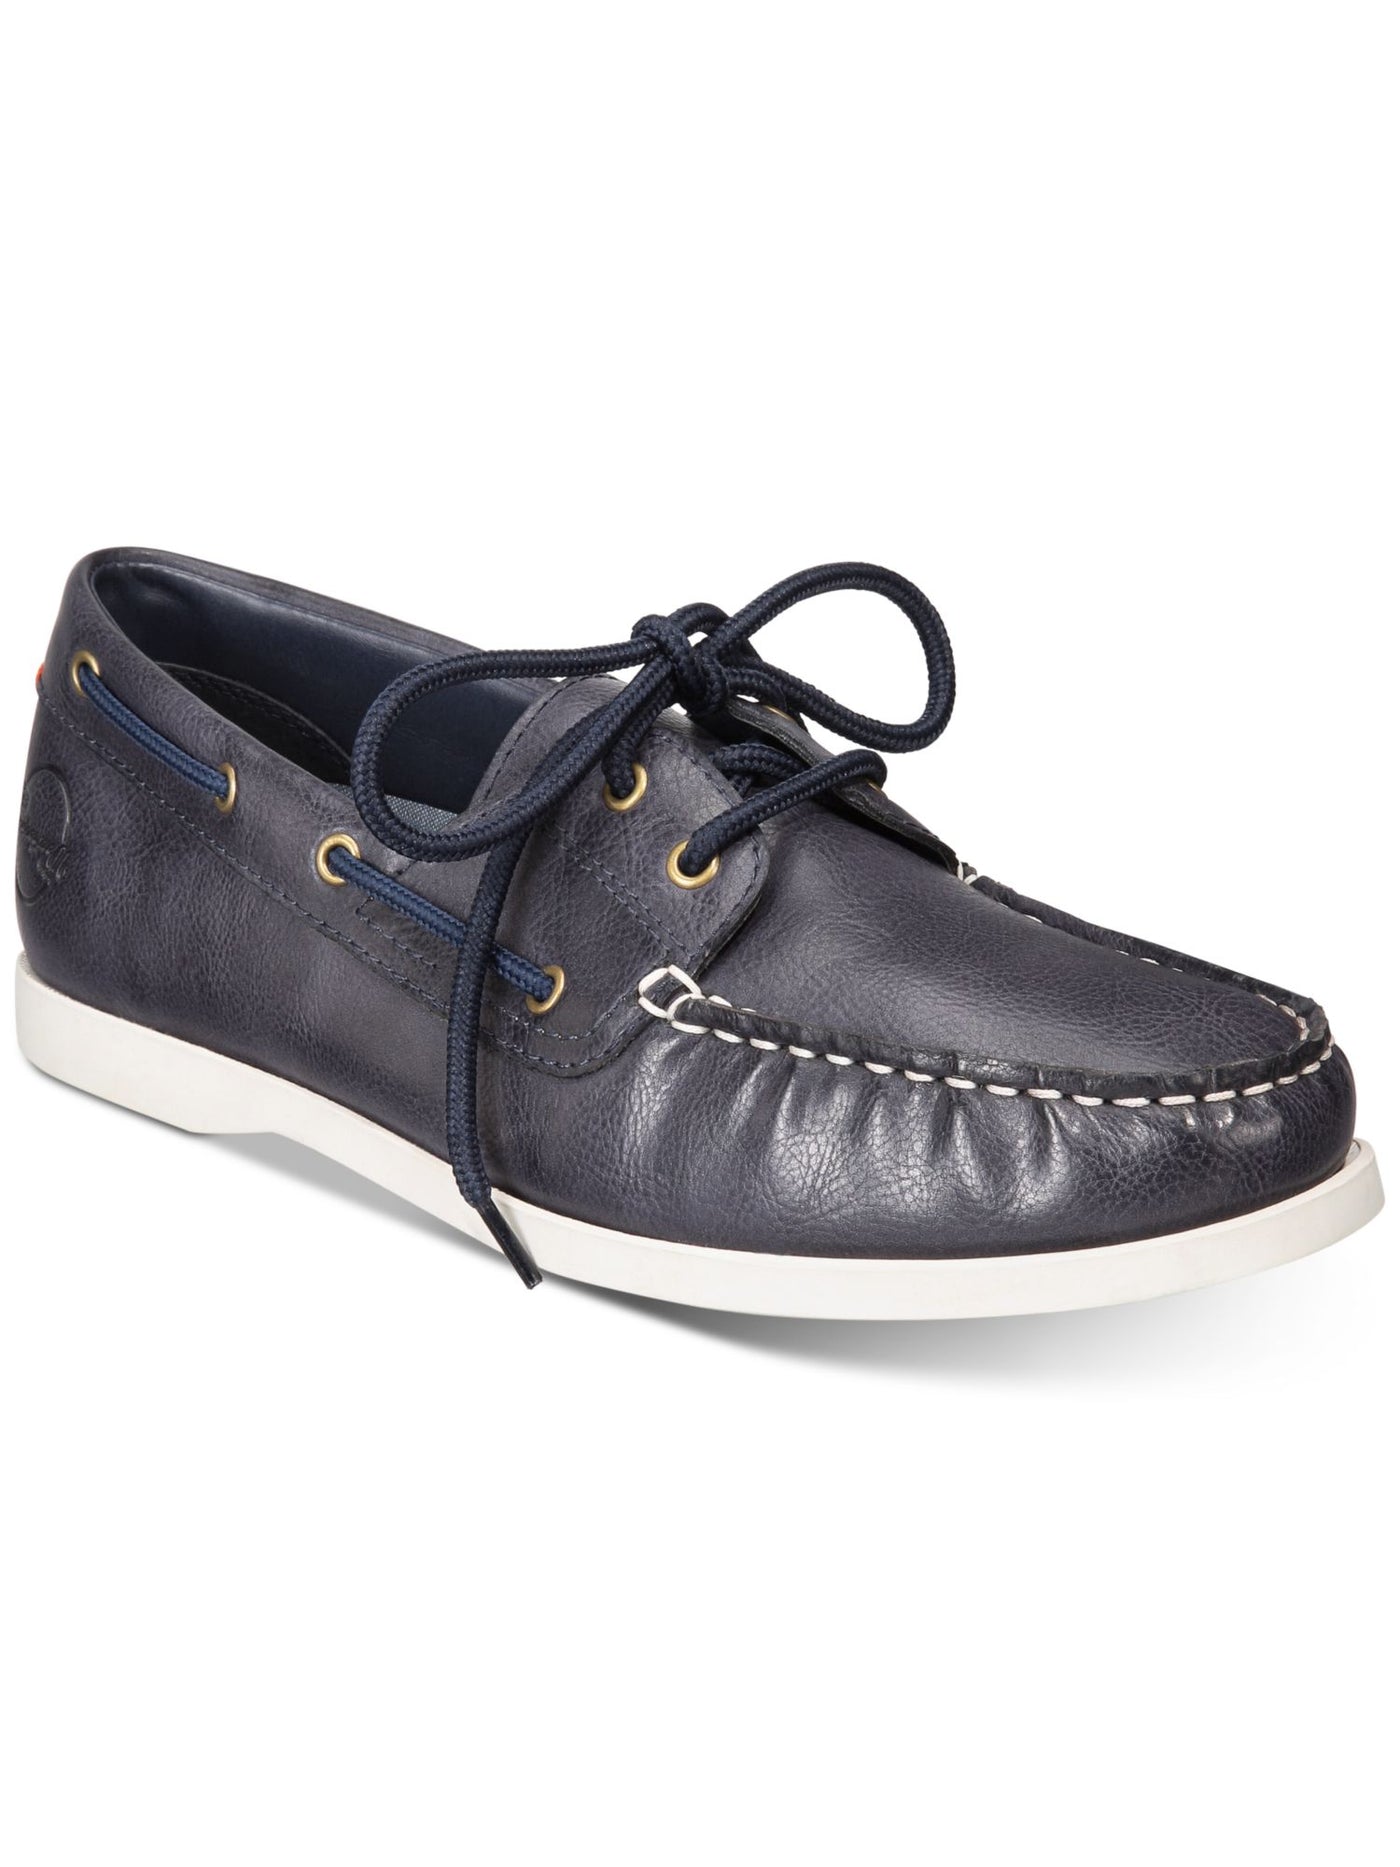 WEATHERPROOF VINTAGE Mens Navy Cushioned Benny Round Toe Lace-Up Boat Shoes 12 M